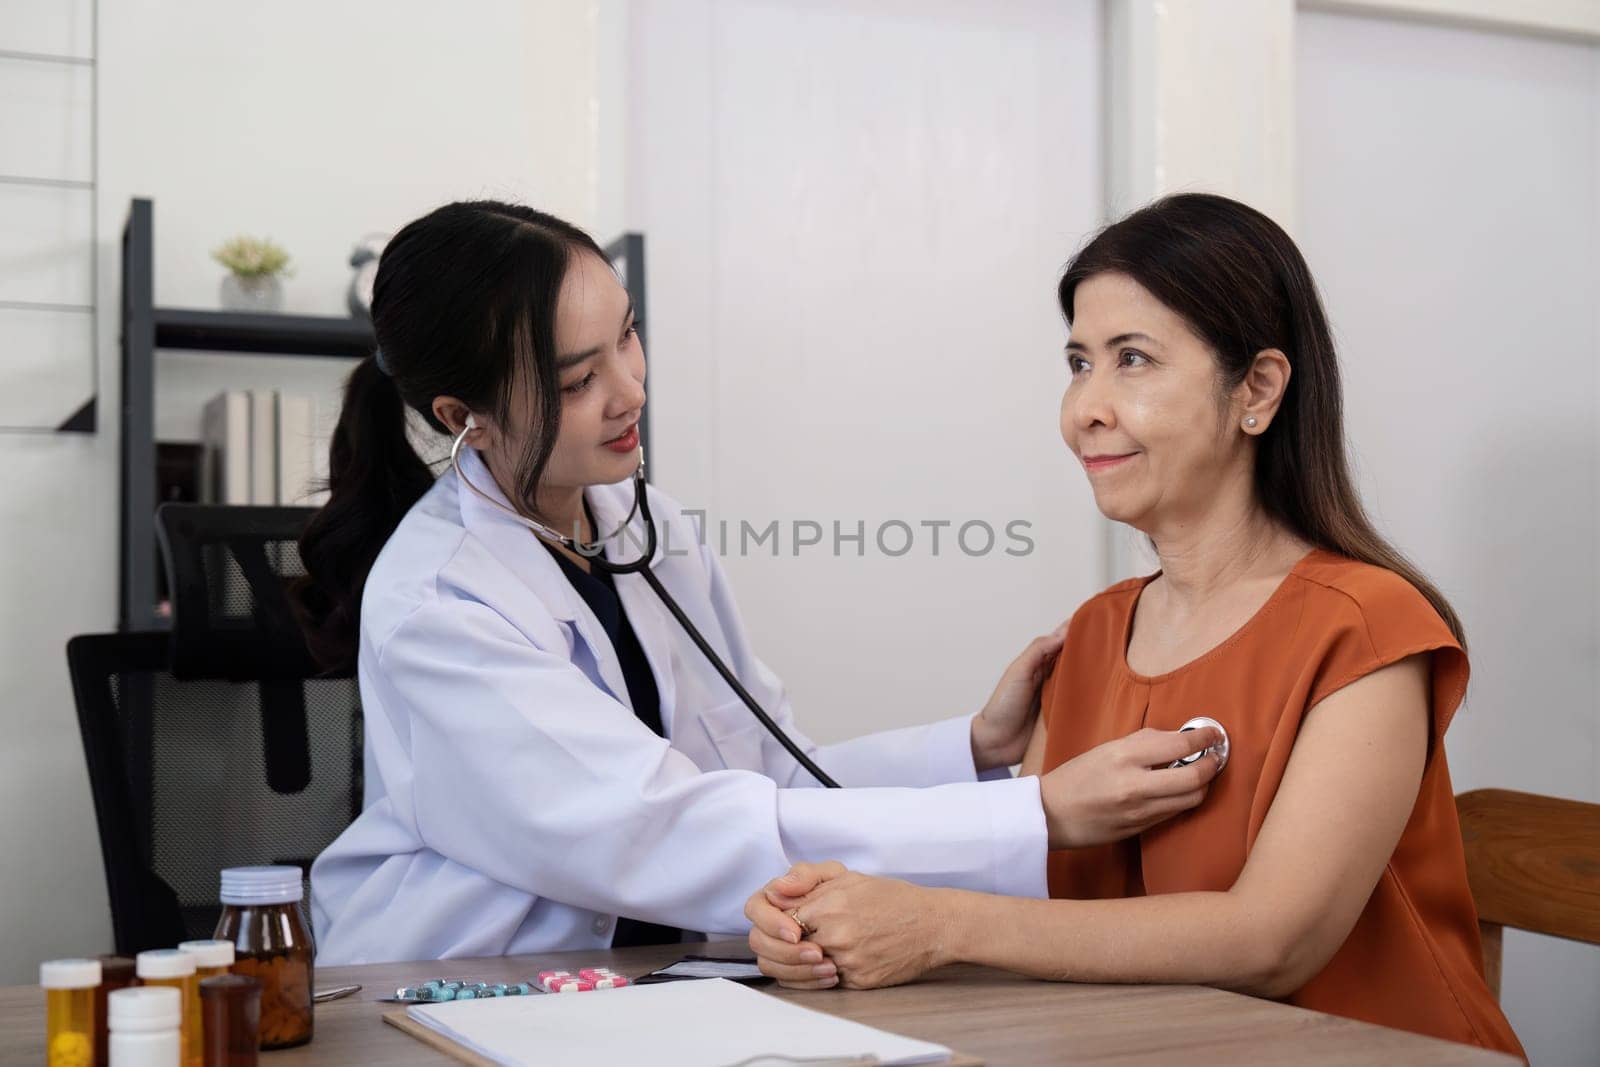 Elderly woman asian patient are check up health while a woman doctor use a stethoscope to hear heart rate. elderly healthcare concept.